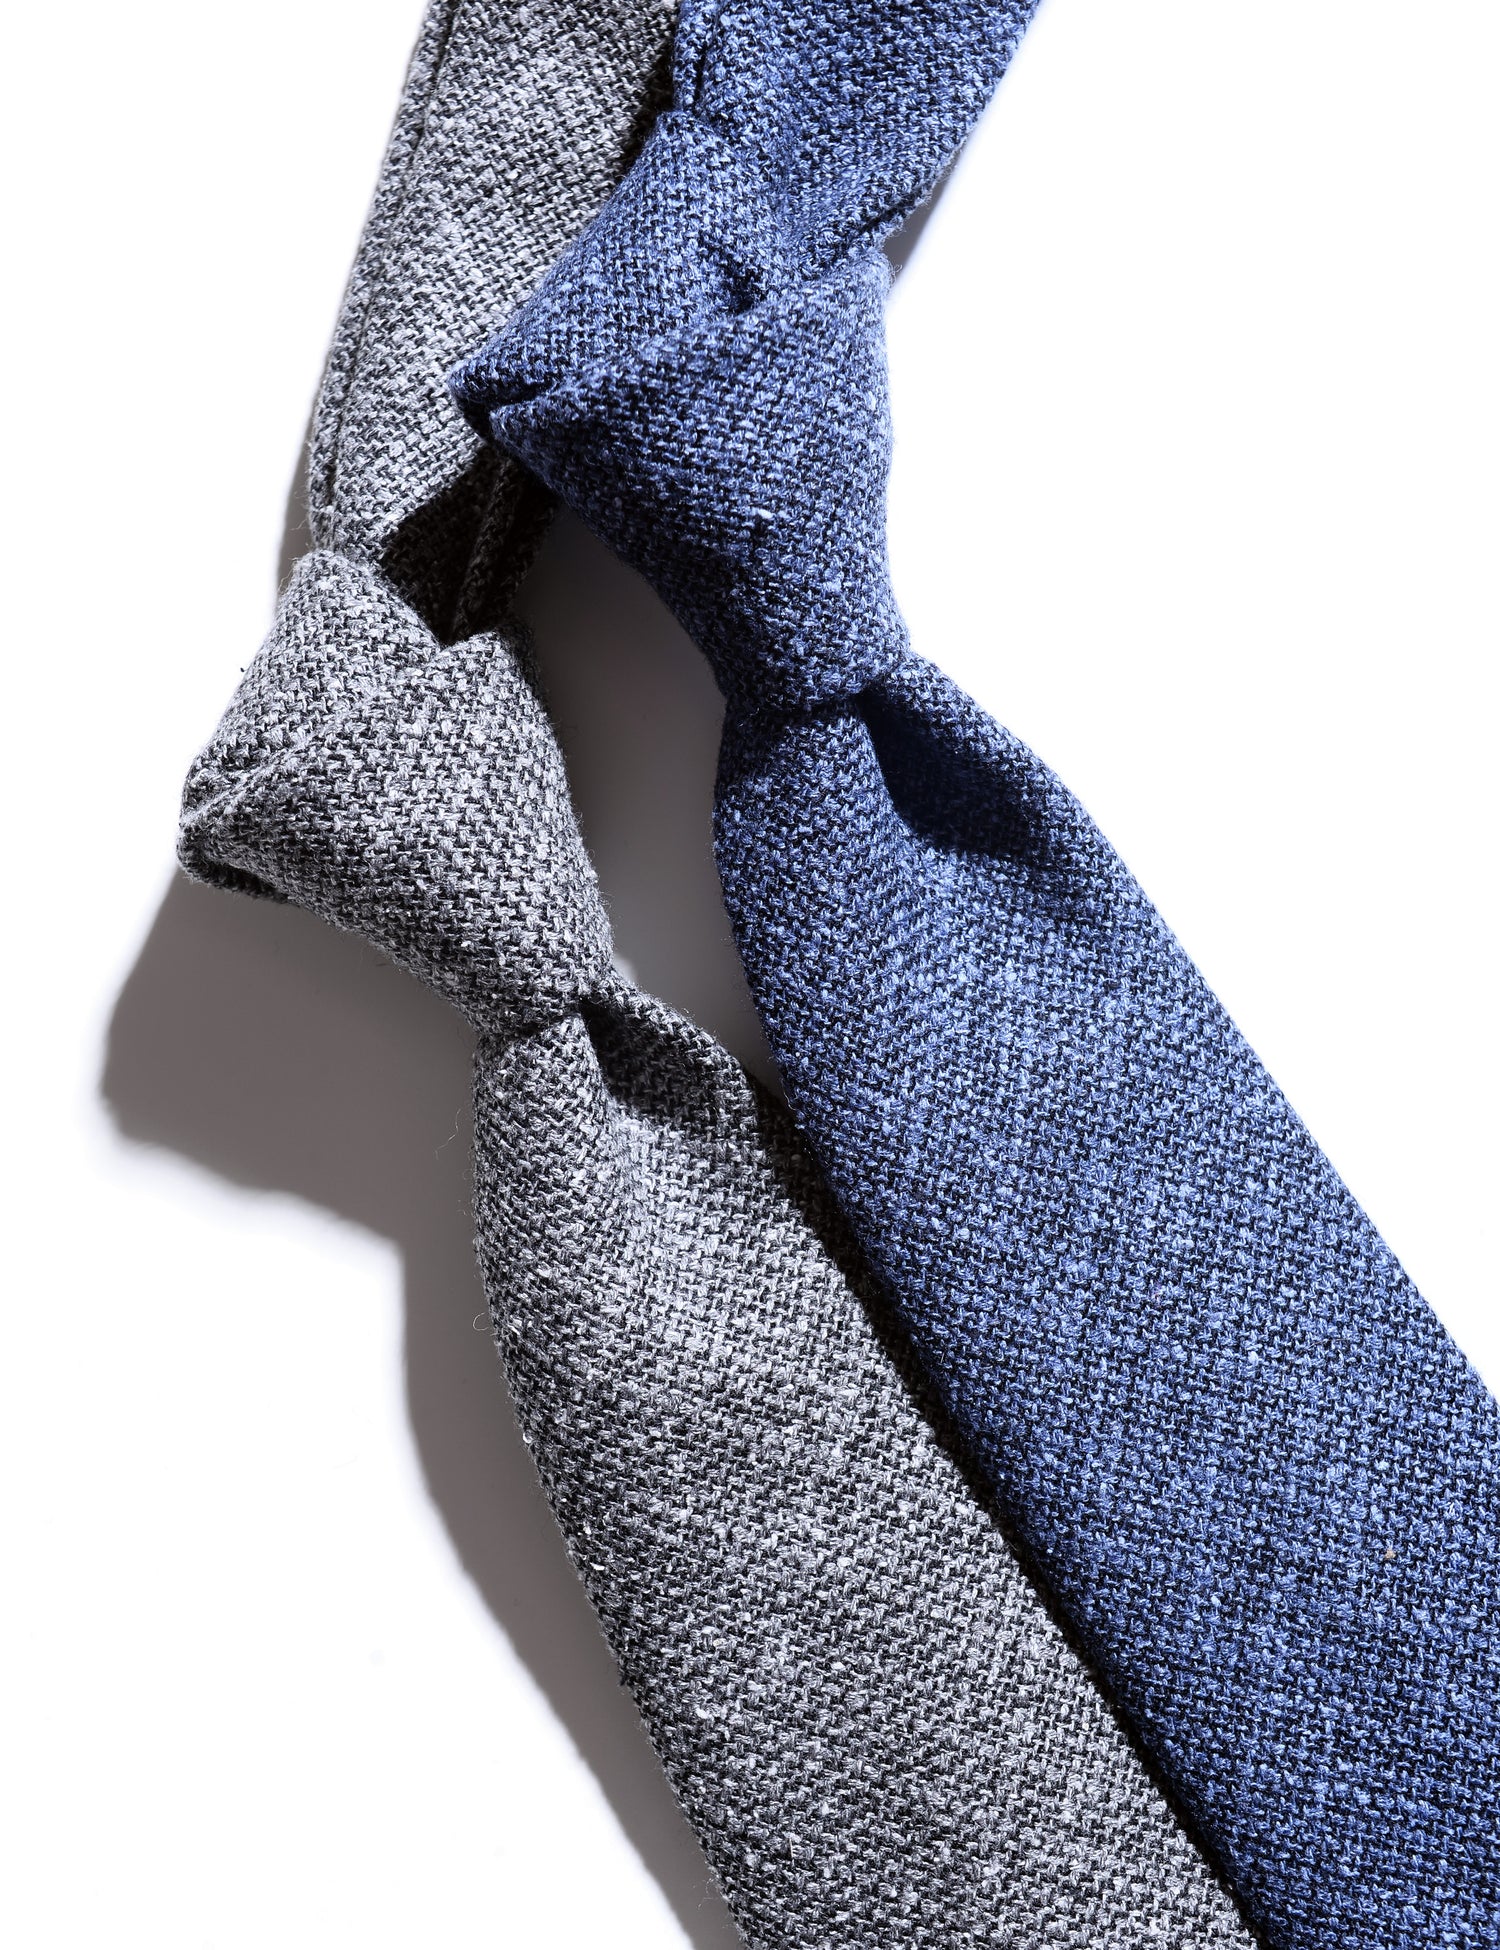 Close-up of Textured Wool Tie - Ash showing fabric texture